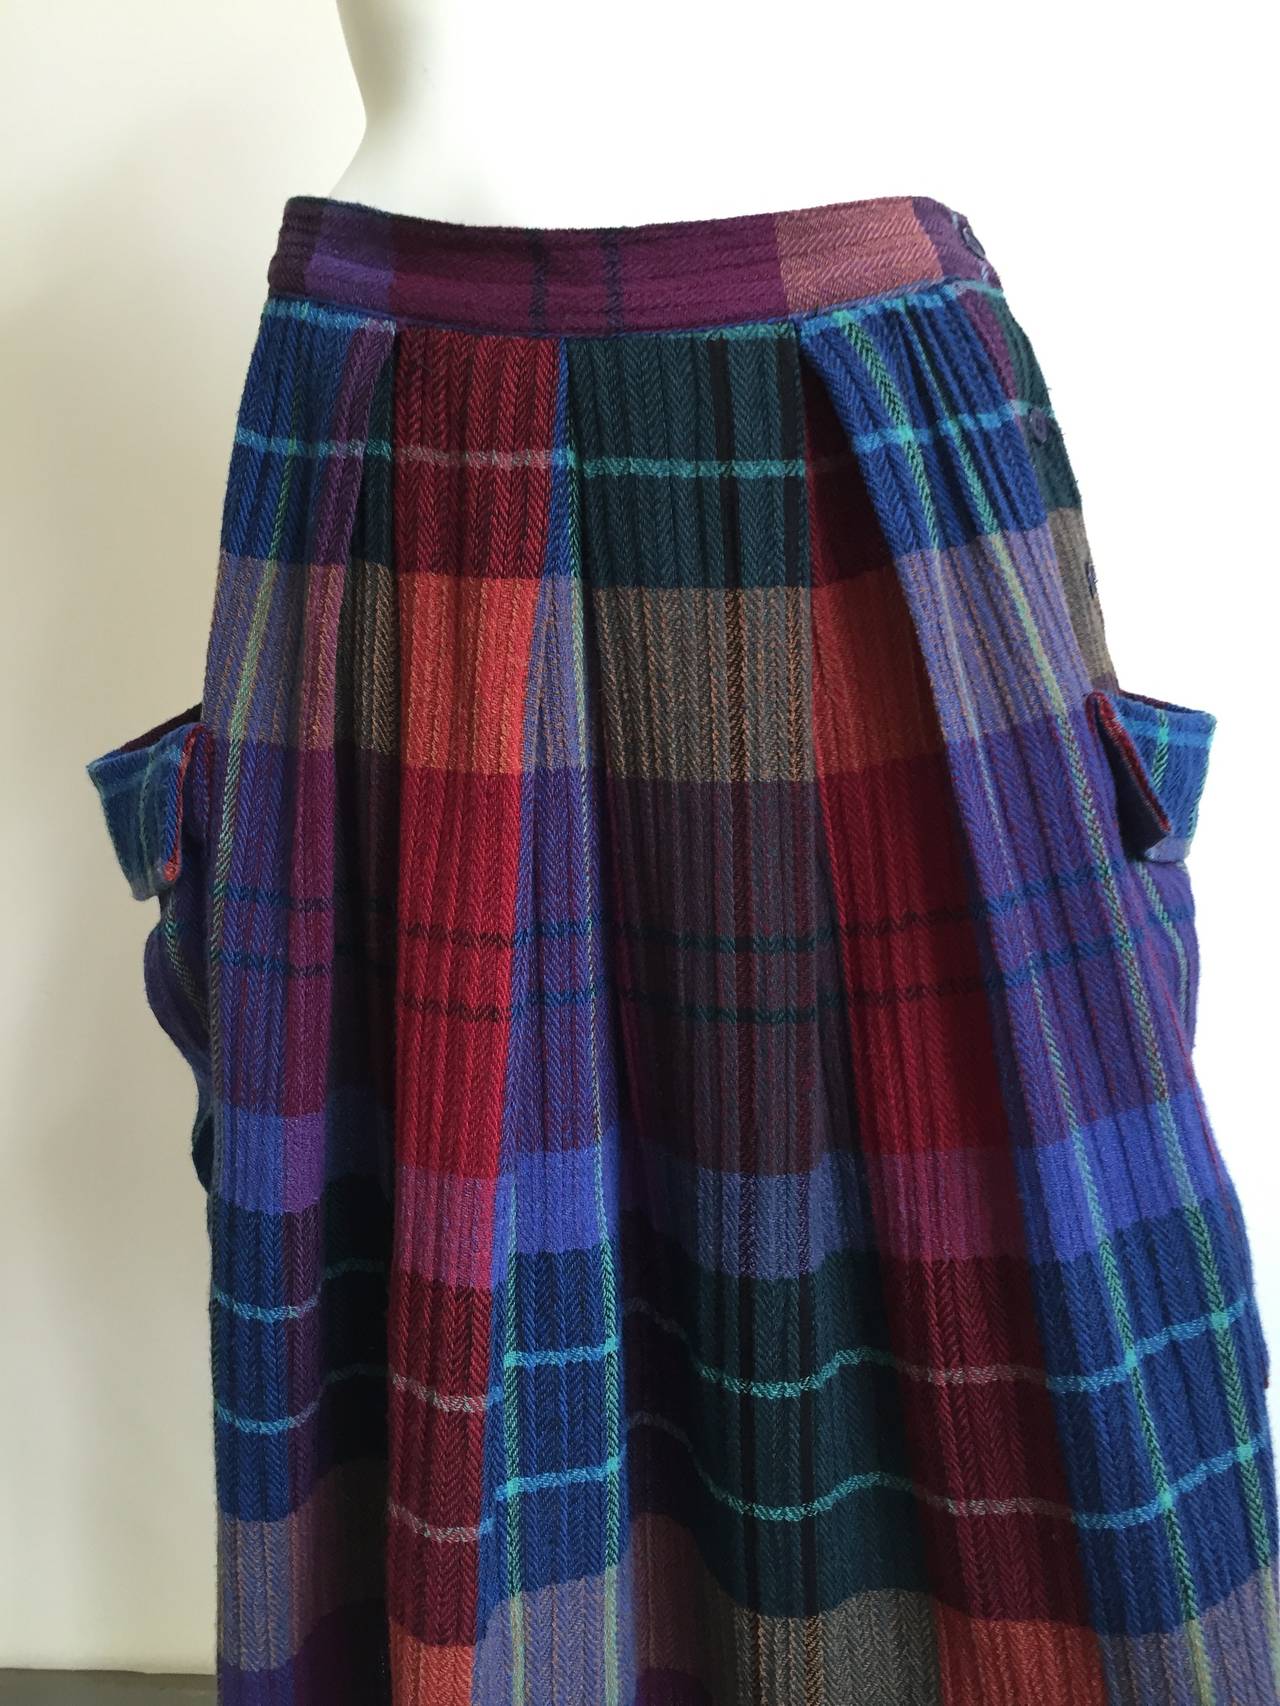 Black Mary McFadden Plaid Skirt with Side Pockets, 1980s   For Sale